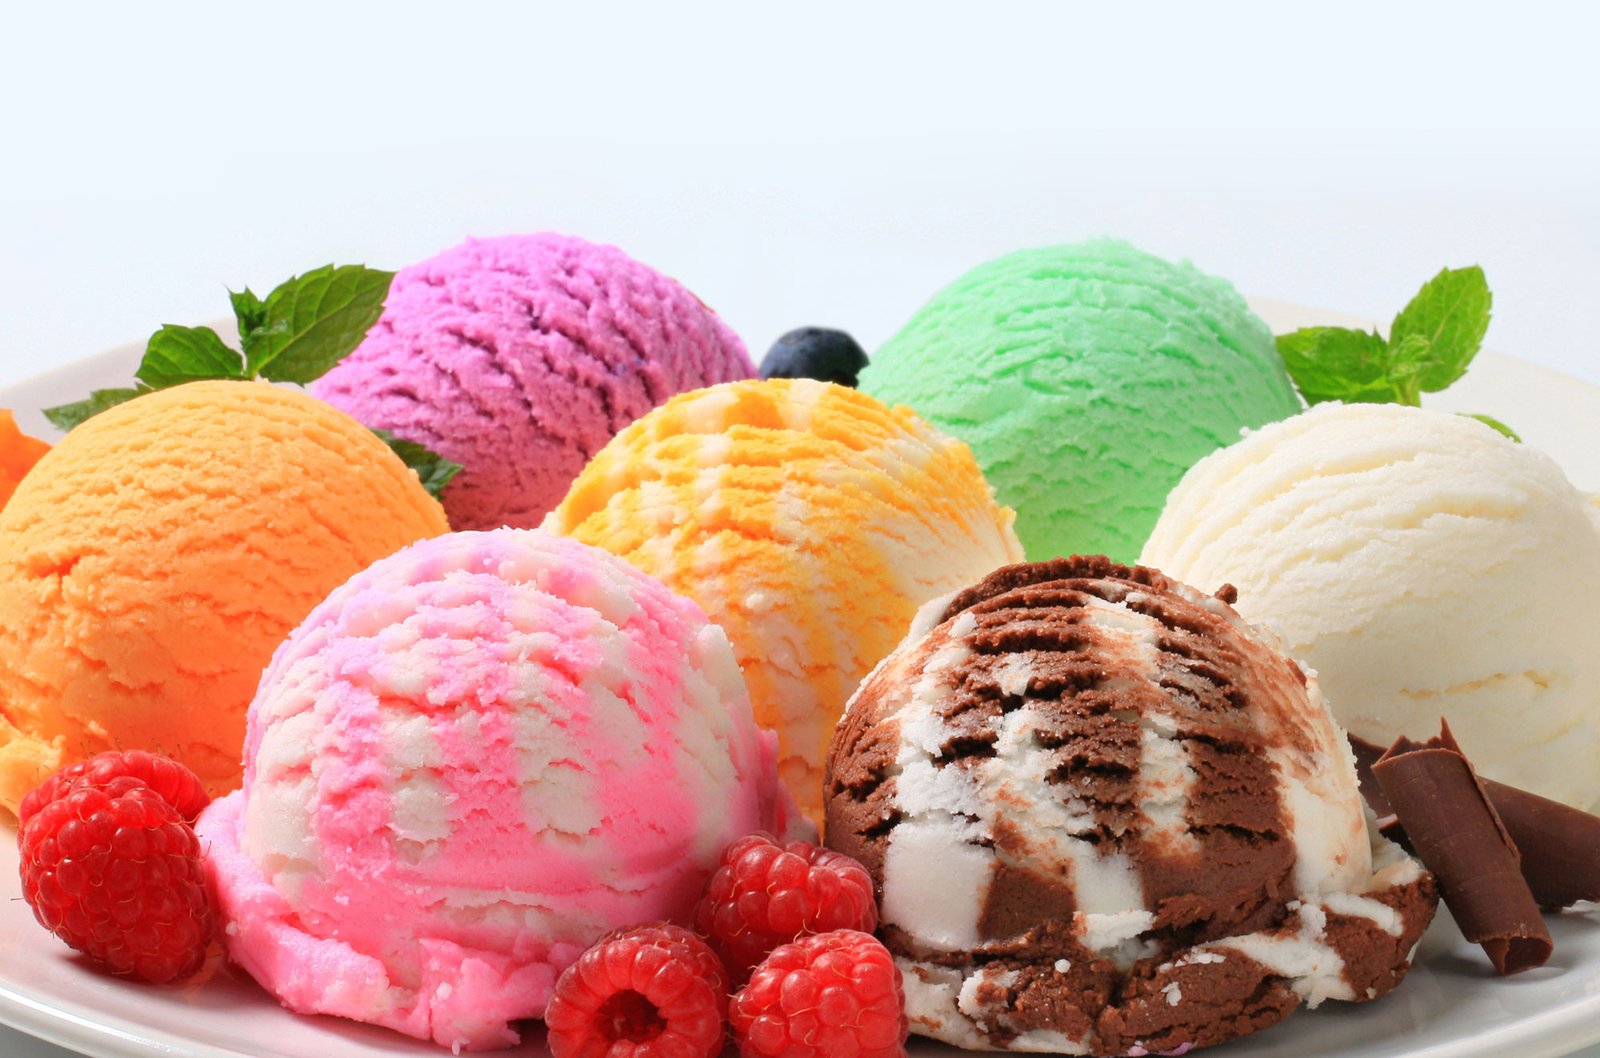 Which ice cream flavors are trending this summer?